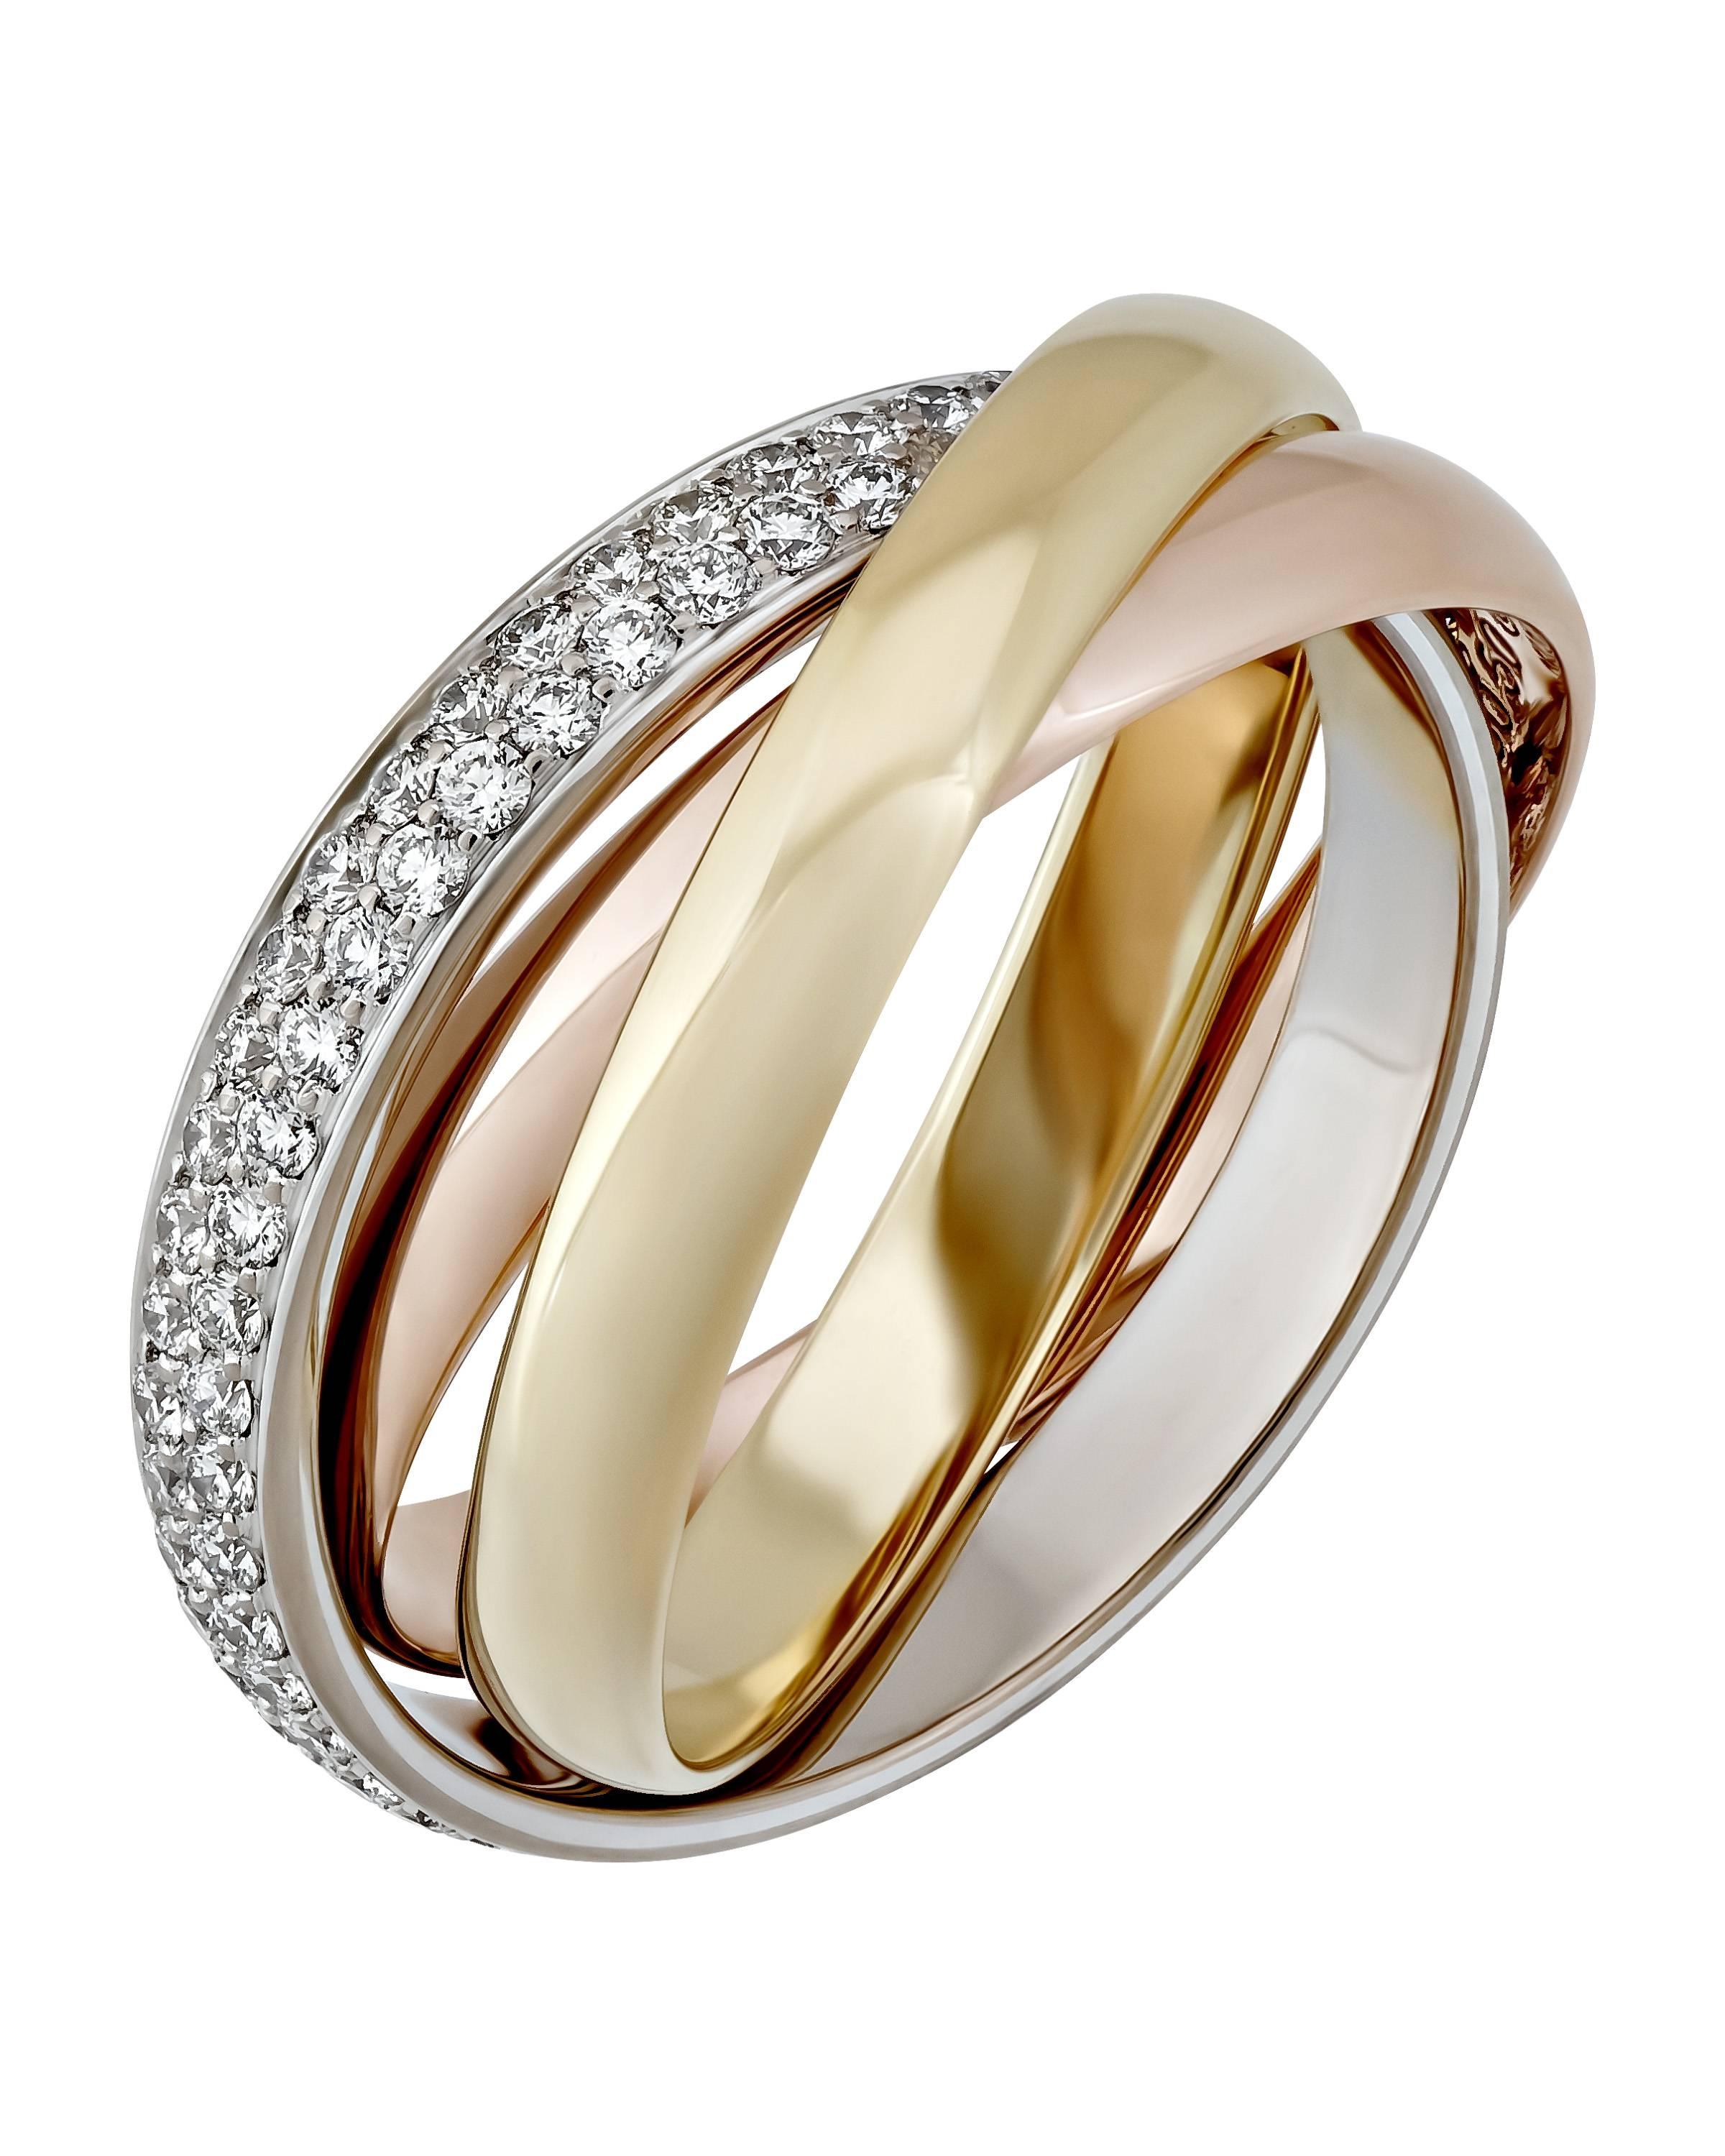 Weight: 5g
TCW: .45ct
Ring Size: 5.5